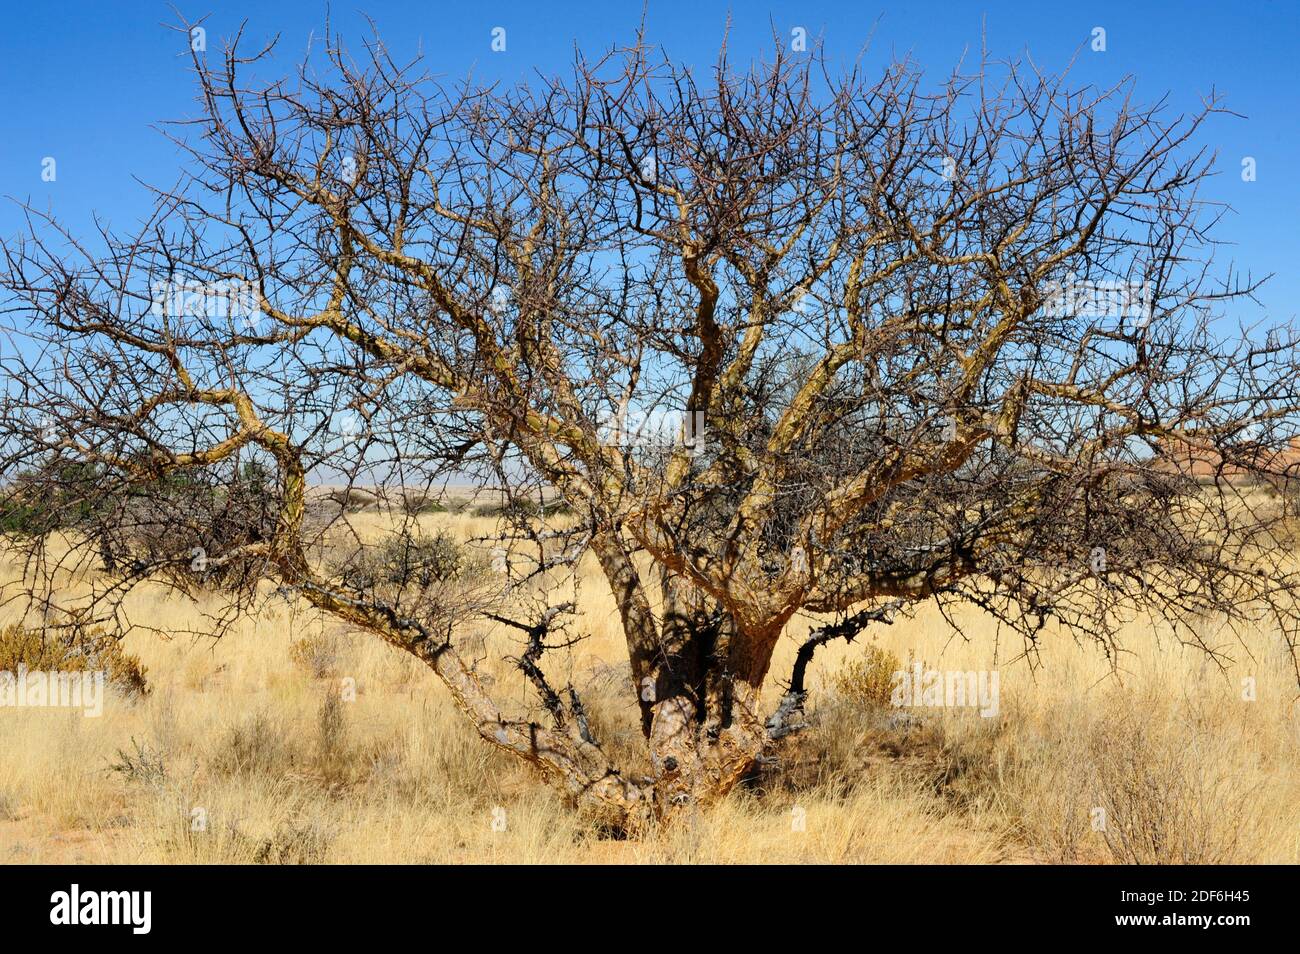 Blue-leaved corkwood (Commiphora glaucescens) is a little tree Burseraceae family. This photo was taken in Spitzkoppe, Namibia. Stock Photo